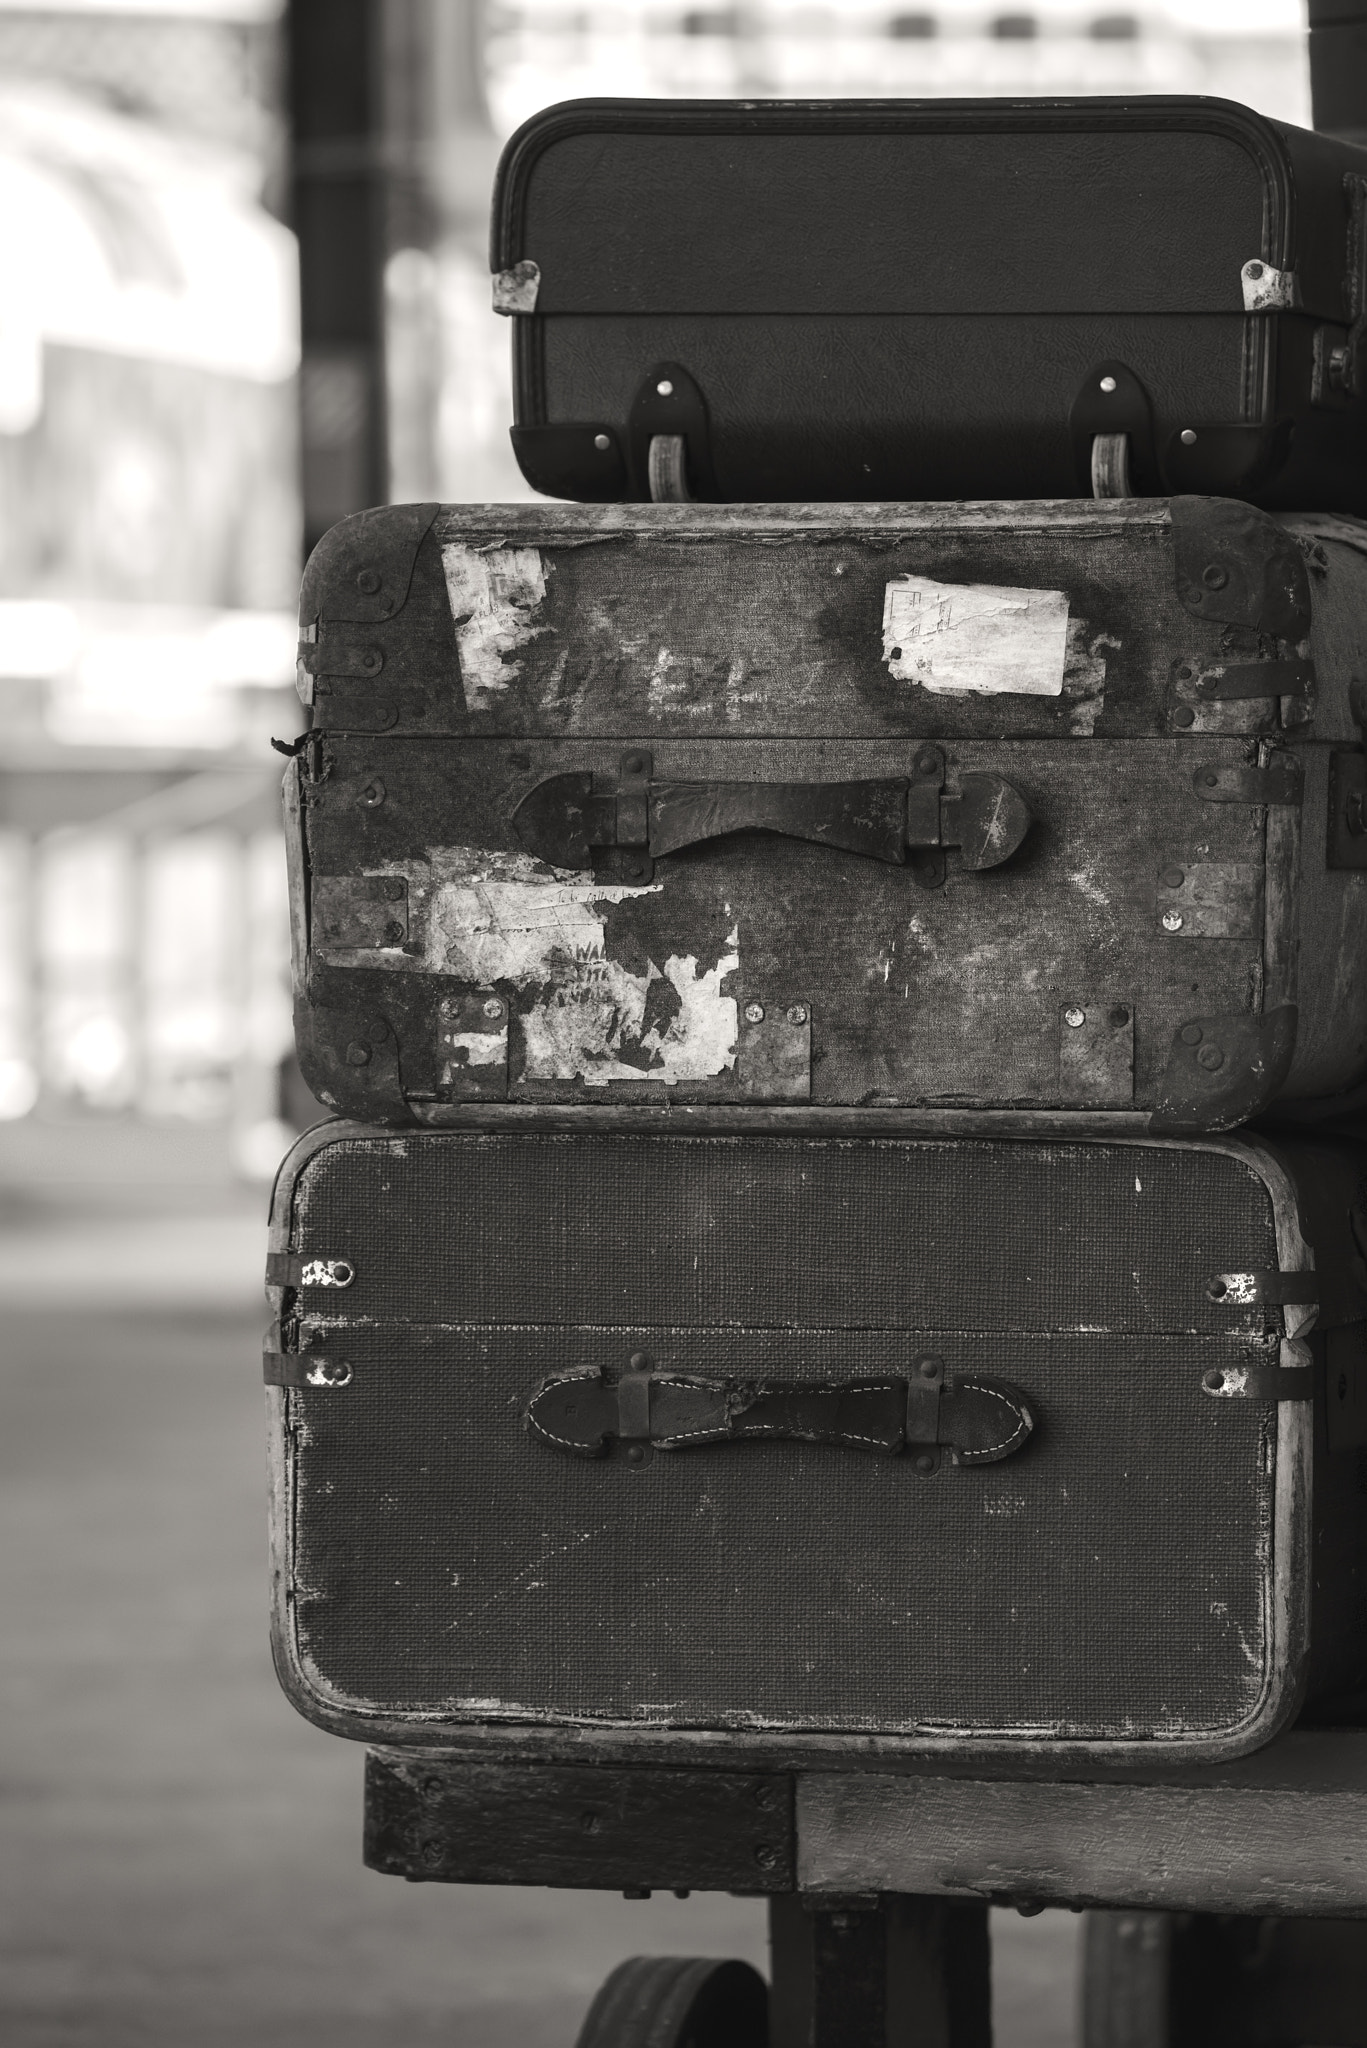 Nikon D800 sample photo. Old worn vintage suitcases stacked on train railway platform in photography